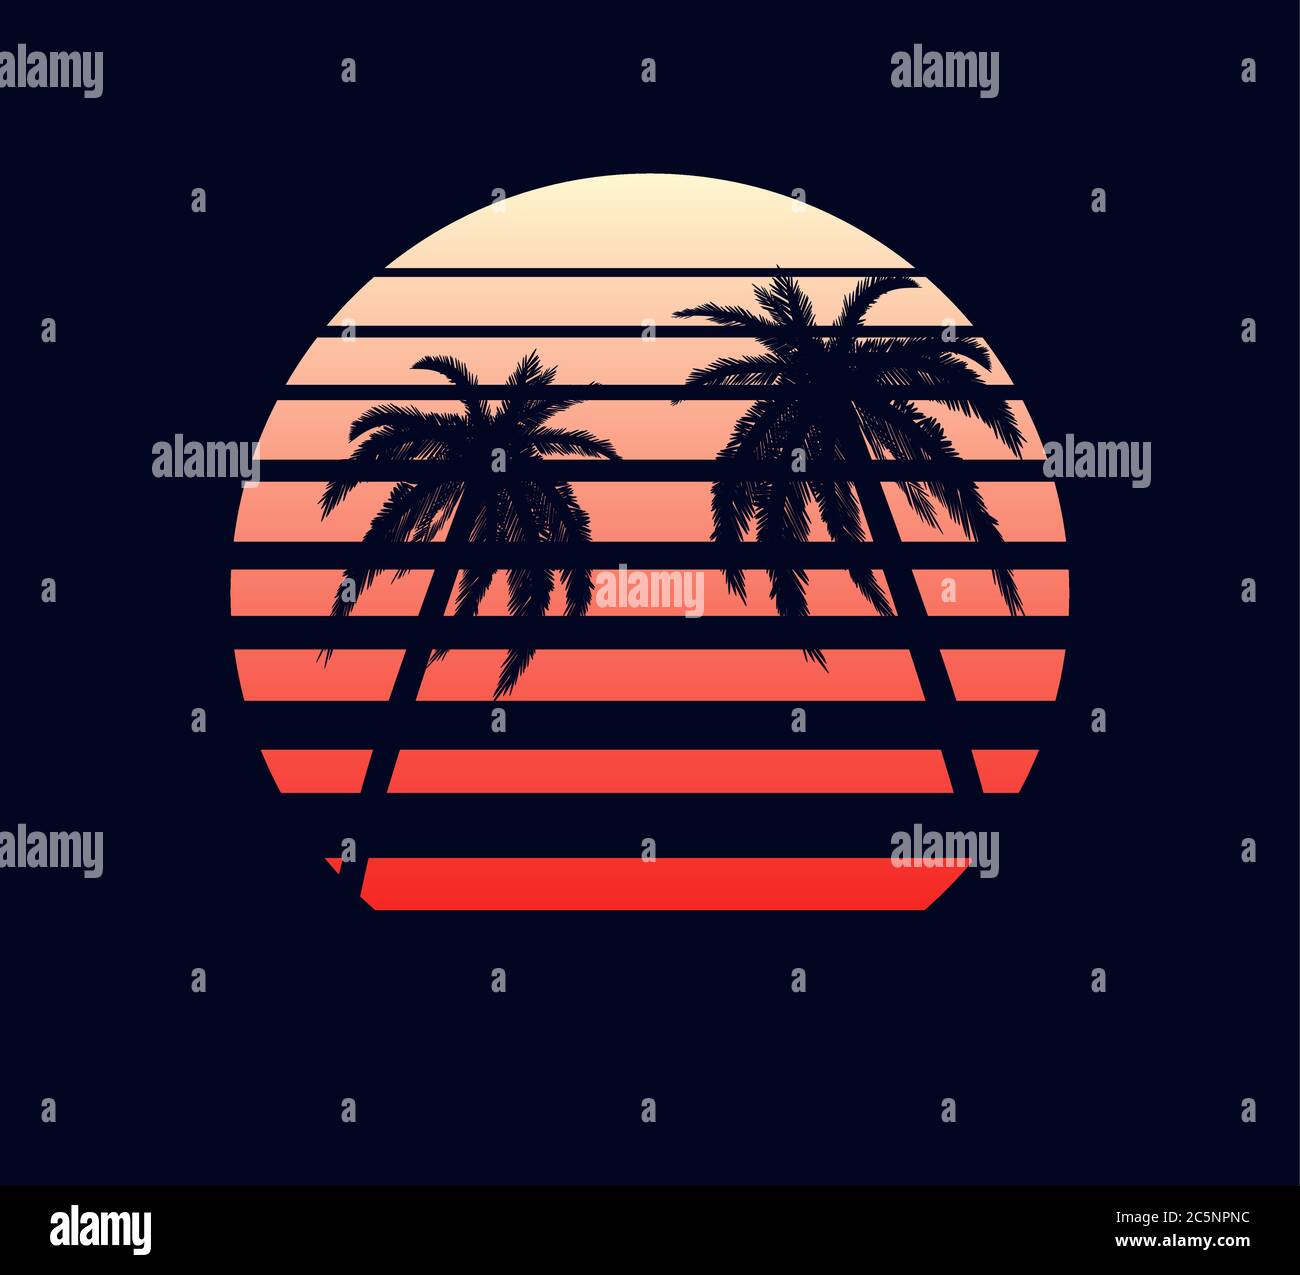 Retro sunset red white. Abstract two palm trees against fantastic ...